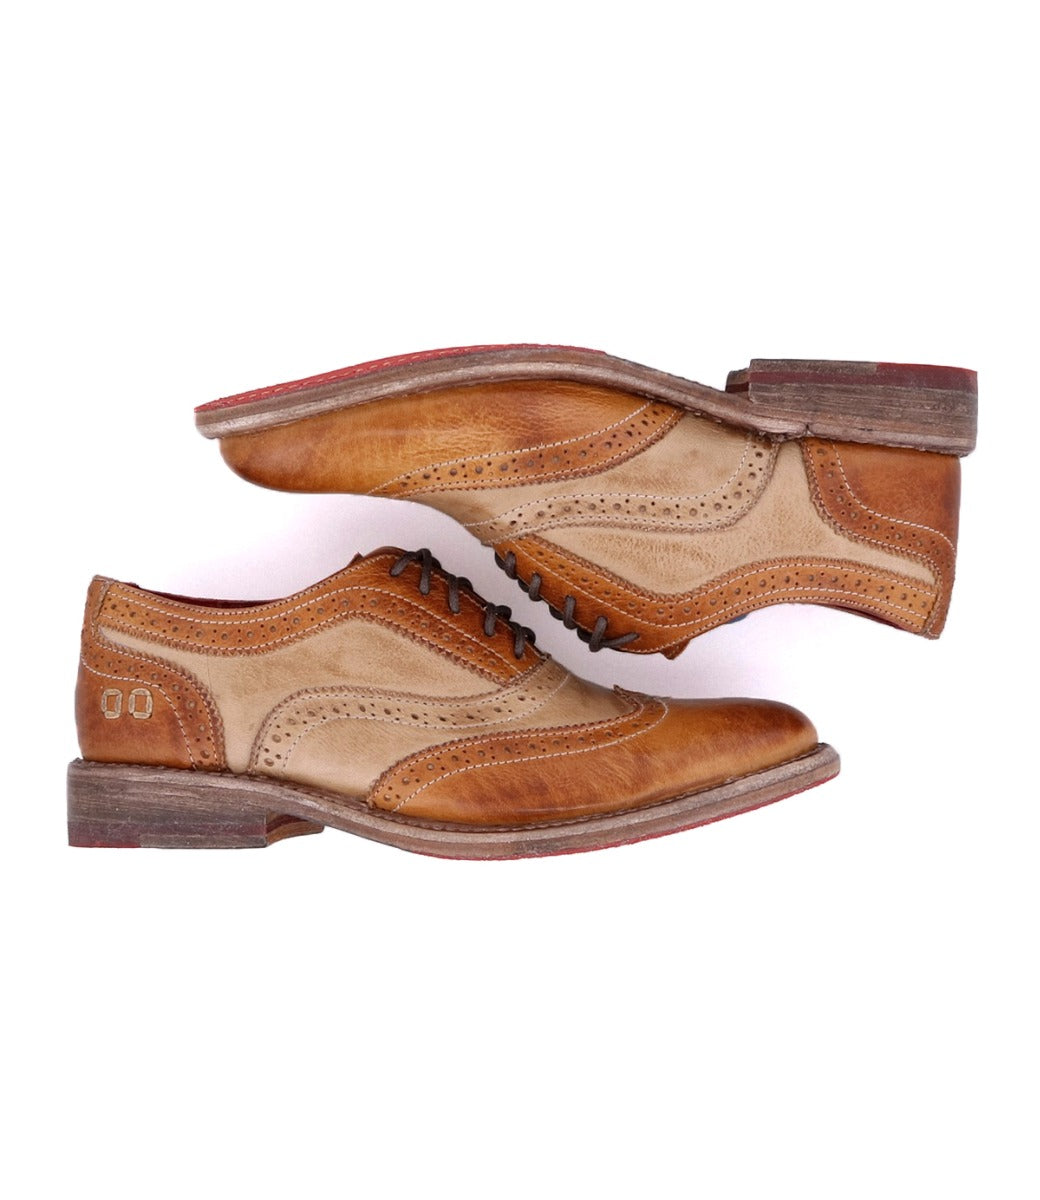 A pair of Bed Stu Lita shoes with brown soles.